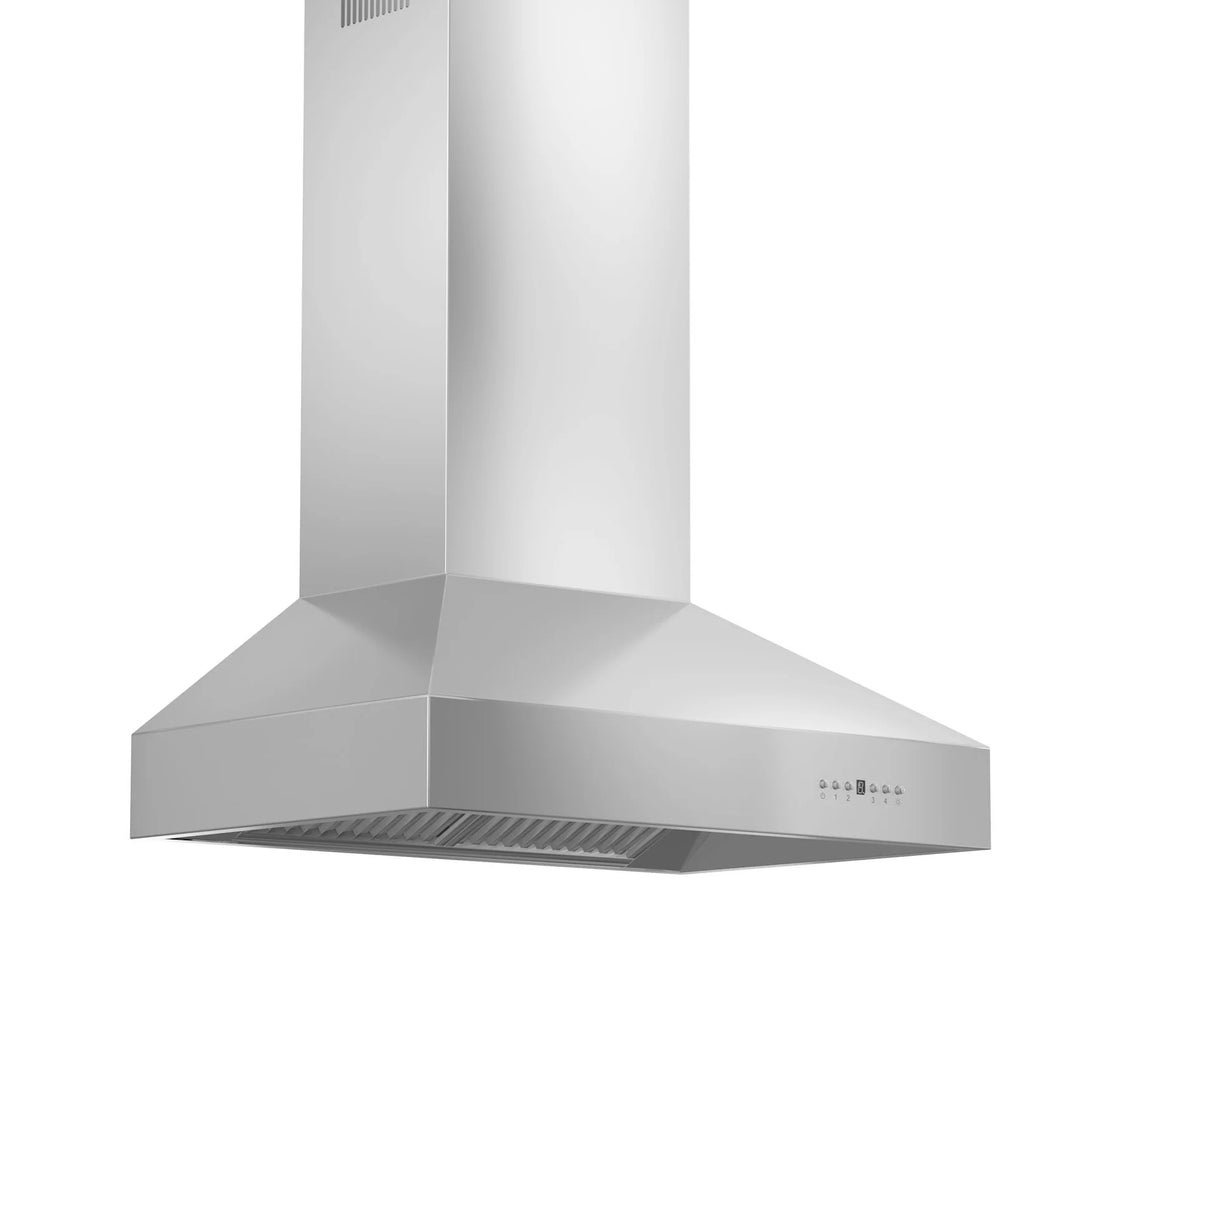 ZLINE 30" Outdoor Ducted Wall Mount Range Hood in Outdoor Approved Stainless Steel